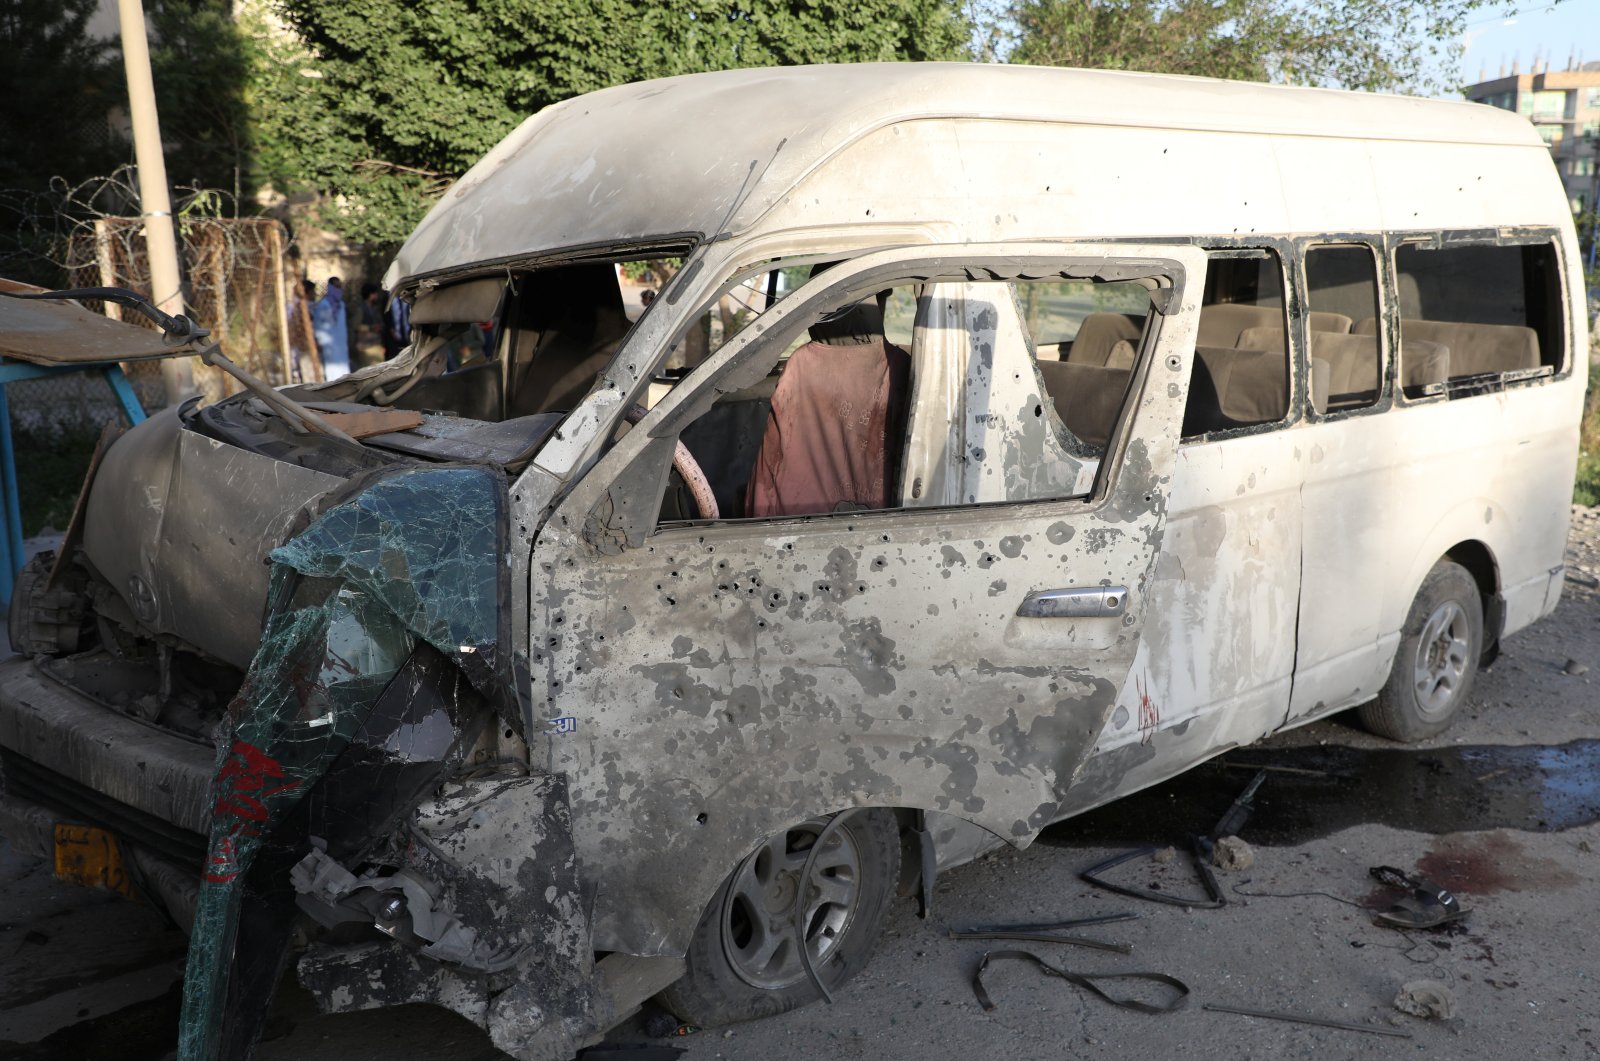 A wreckage of a bus which carried employees of an Afghan television station and was bombed is seen in Kabul, Afghanistan May 30, 2020. (Reuters Photo)